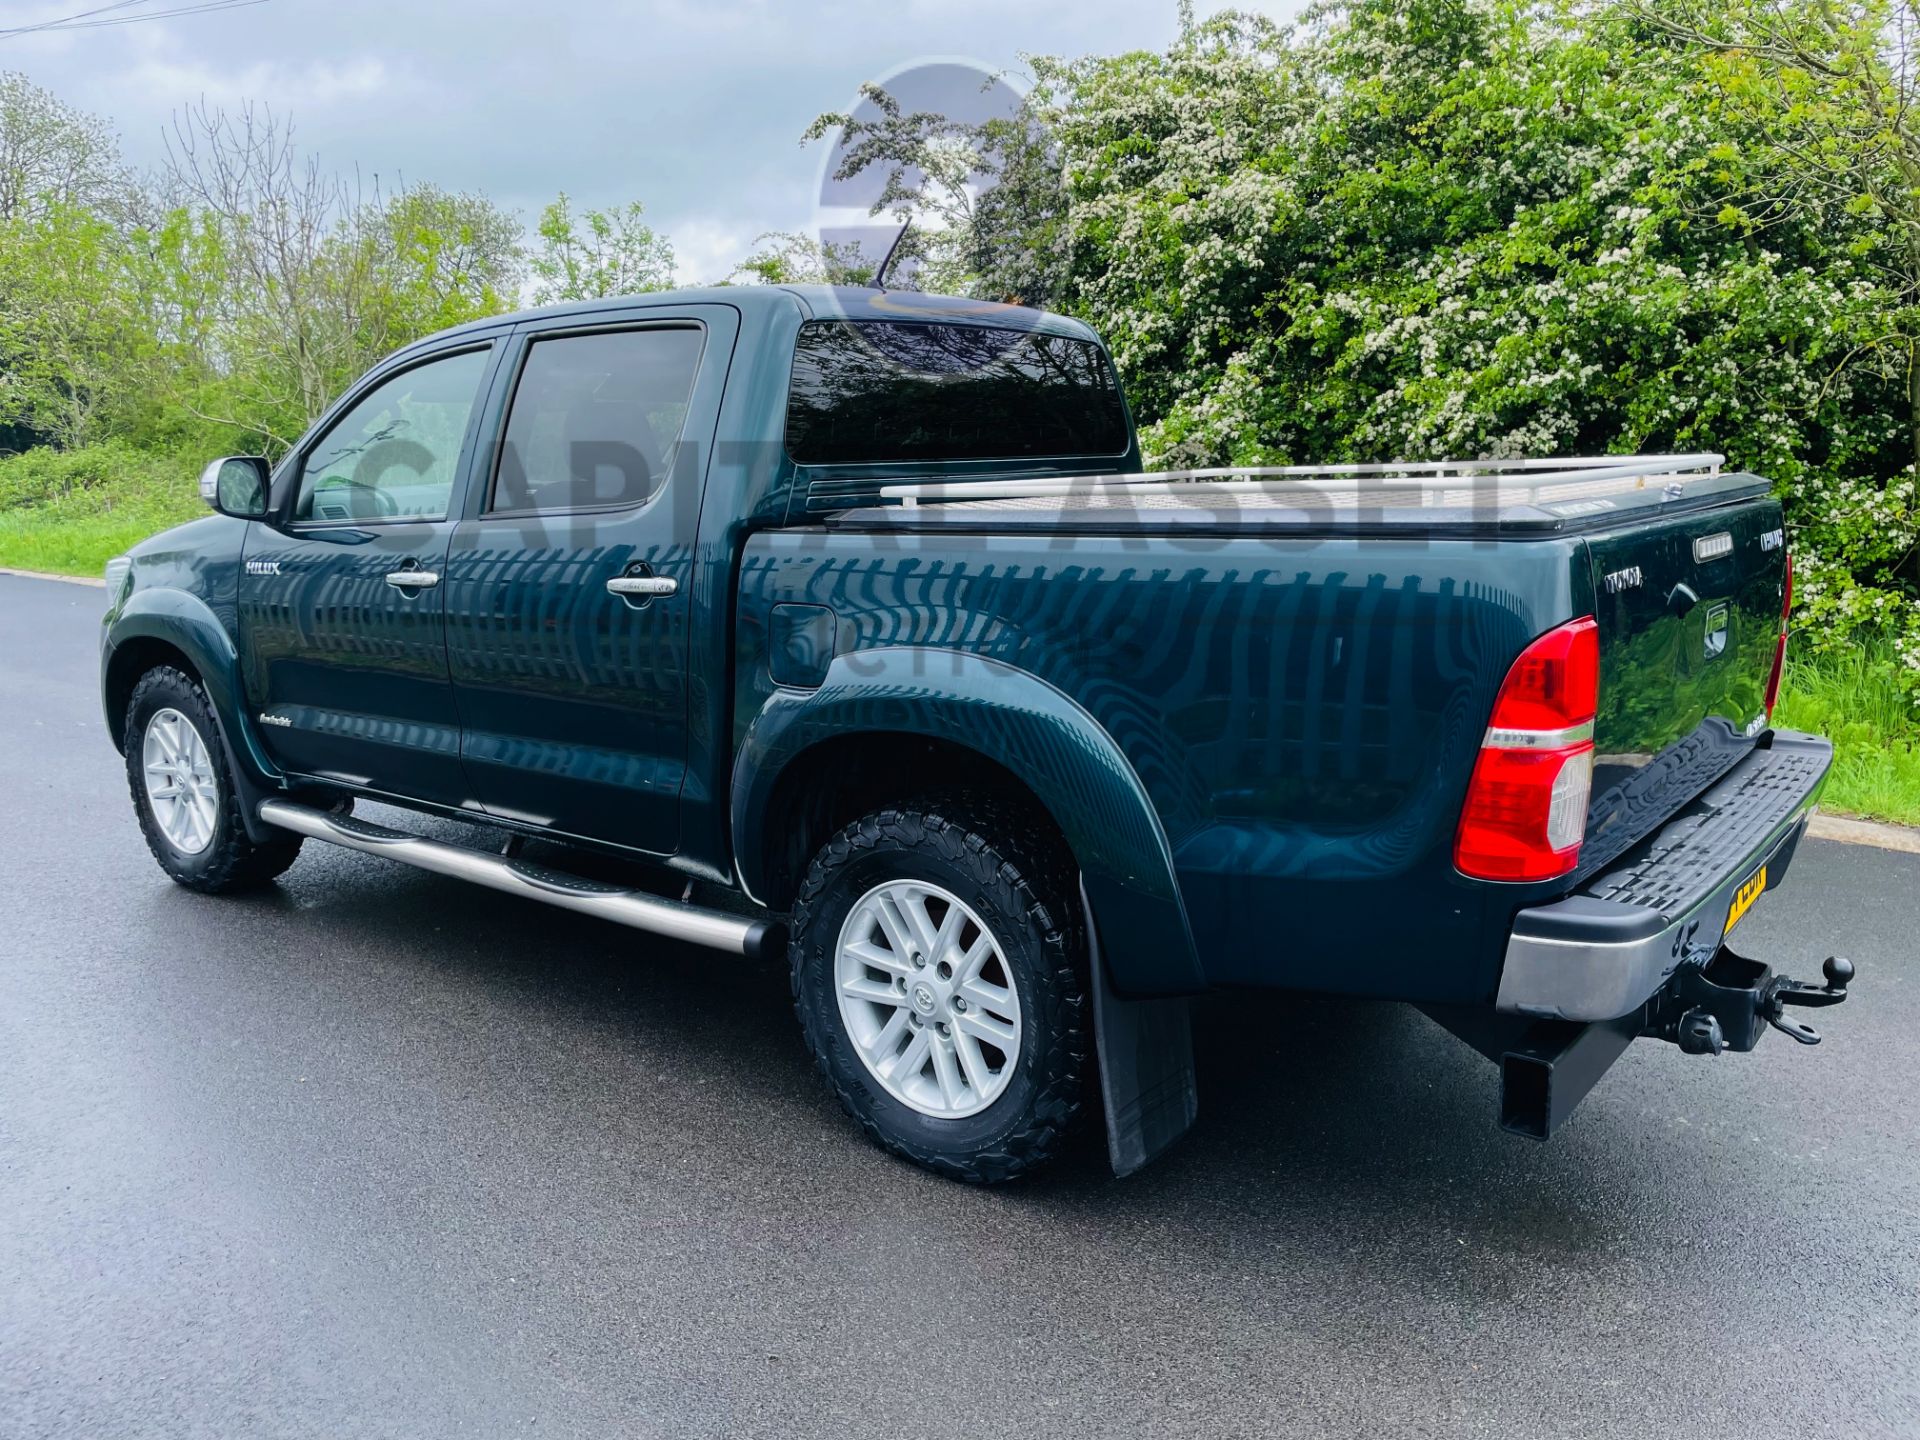 ON SALE TOYOTA HILUX 3.0 D-4D "INVINCIBLE" AUTO (2015 MODEL) TOP SPEC - LEATHER - REAR CAMERA - - Image 10 of 22